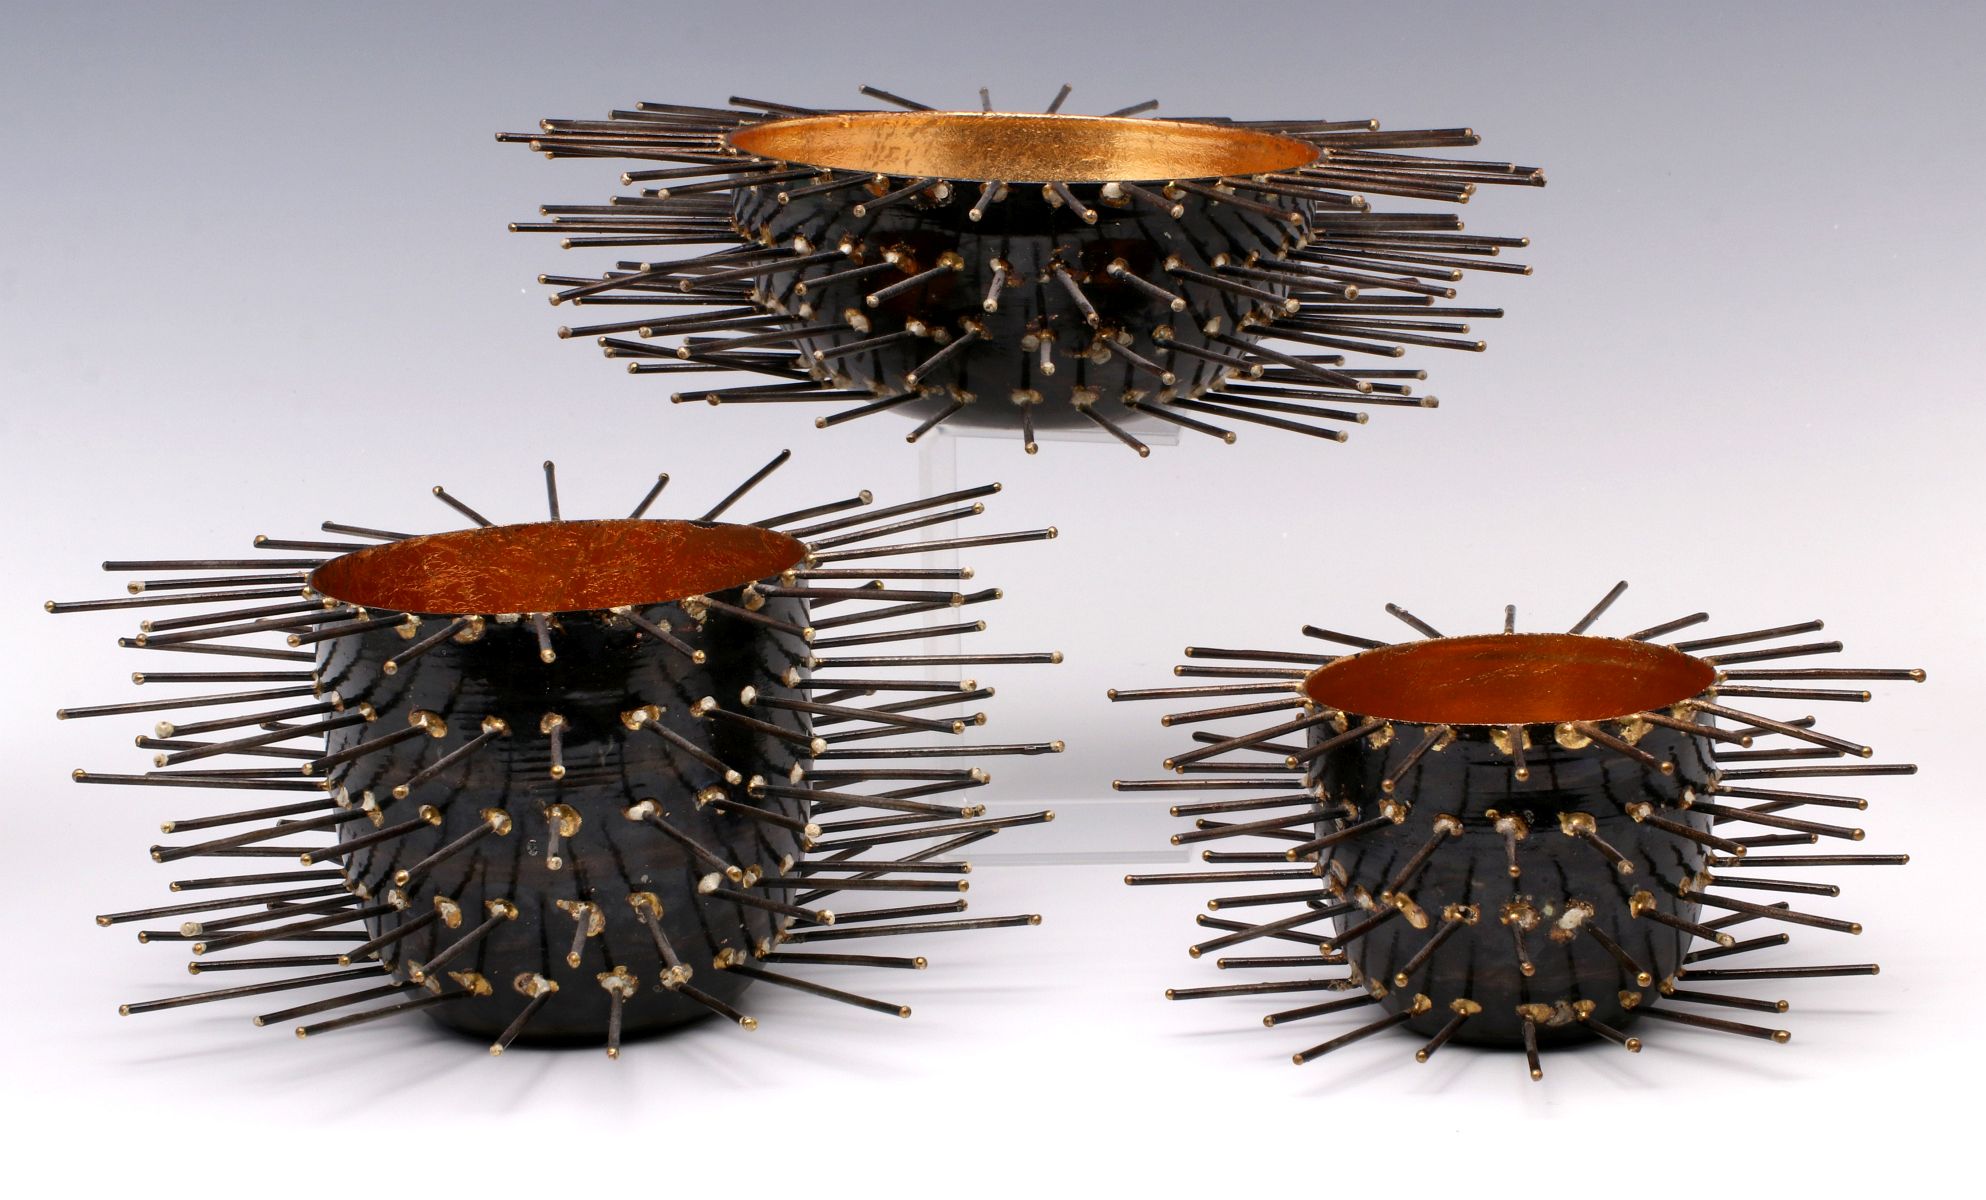 THREE SPINY DECORATIVE VOTIVES OR VESSELS